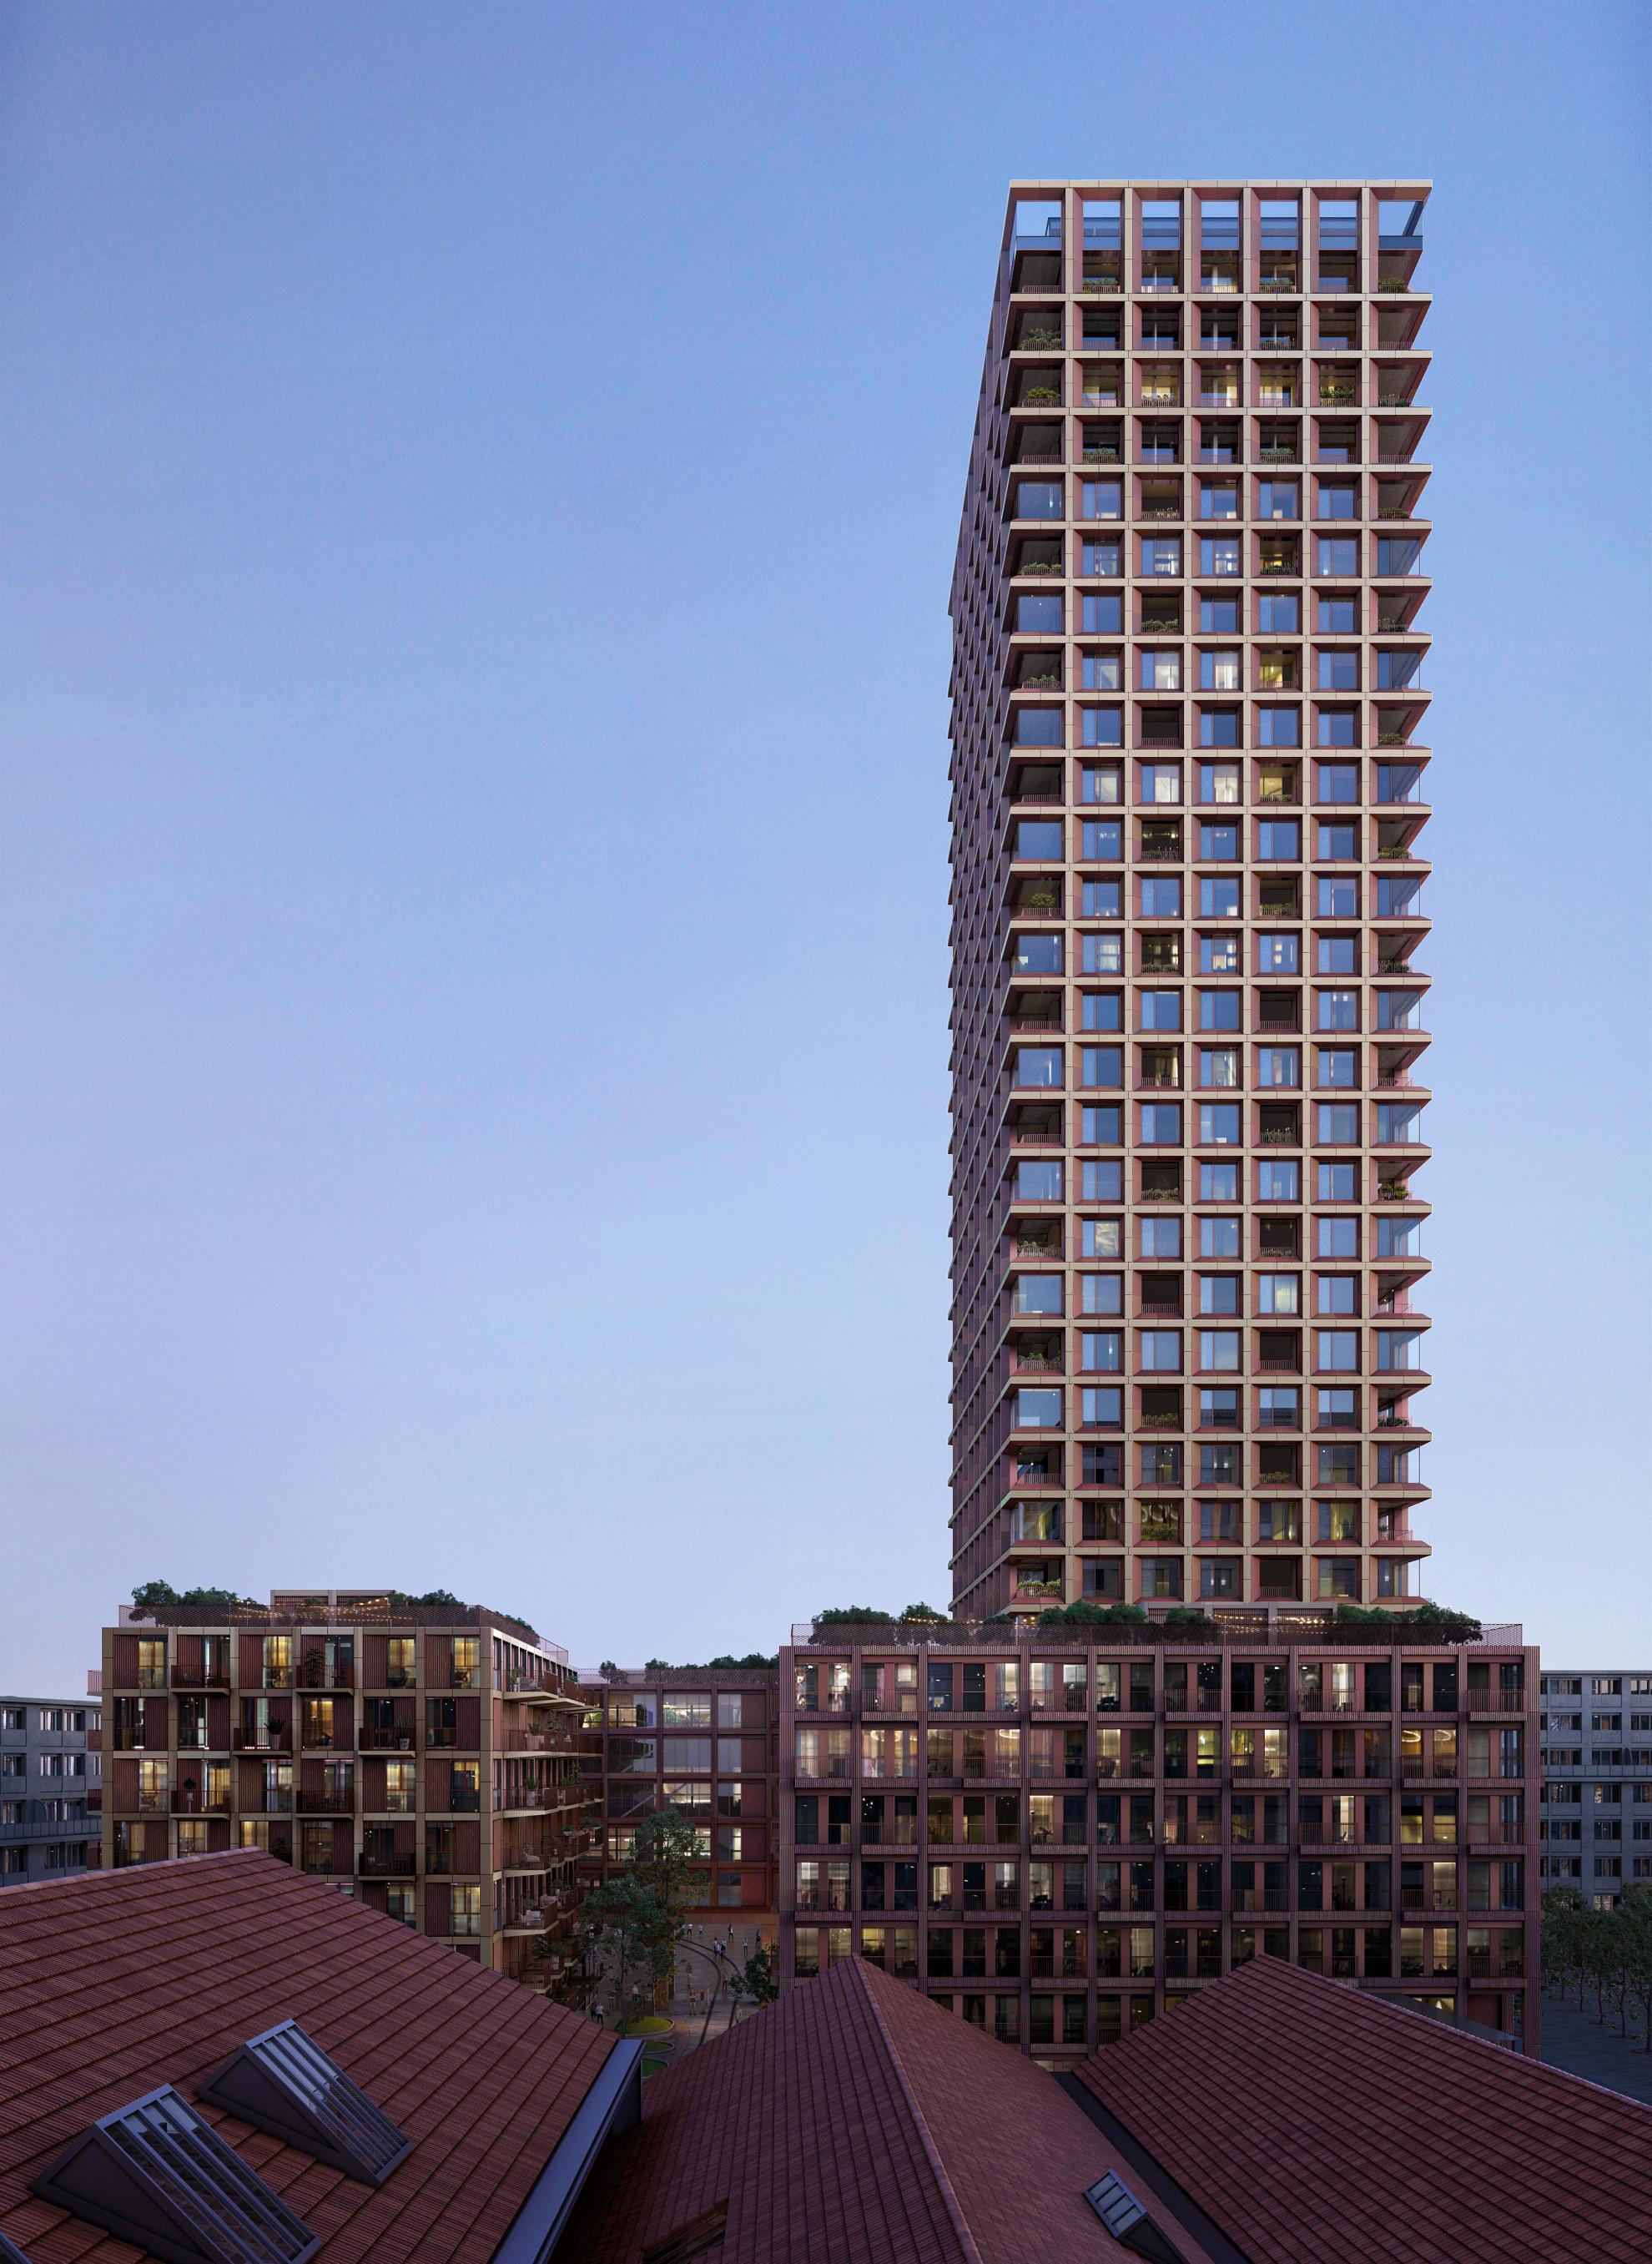 Wood has never been used to build higher: visualisation of the high-rise building planned in Winterthur